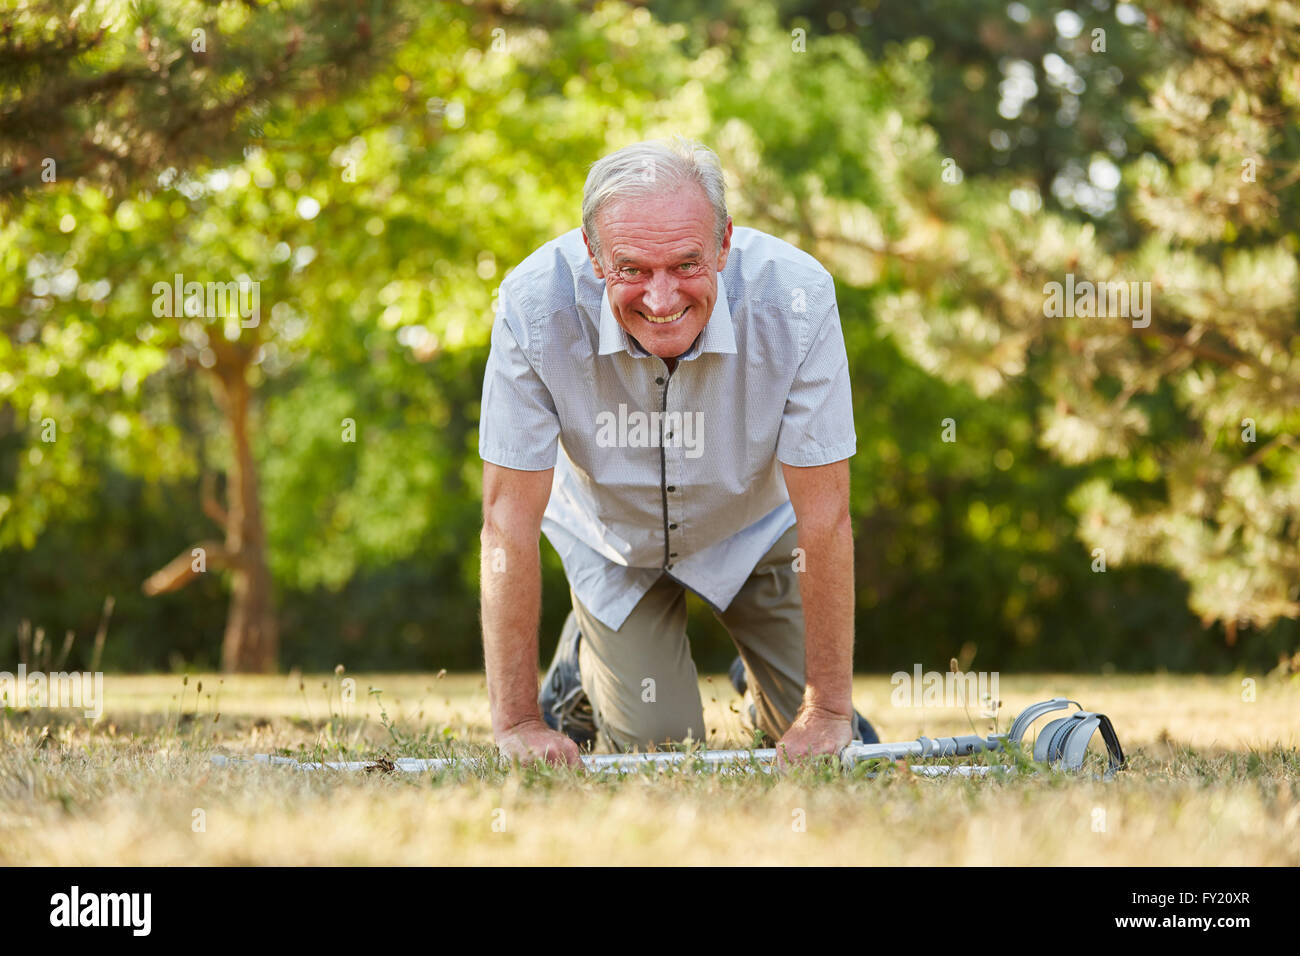 Old man on crutches on his knees in the nature in summer having fun Stock Photo